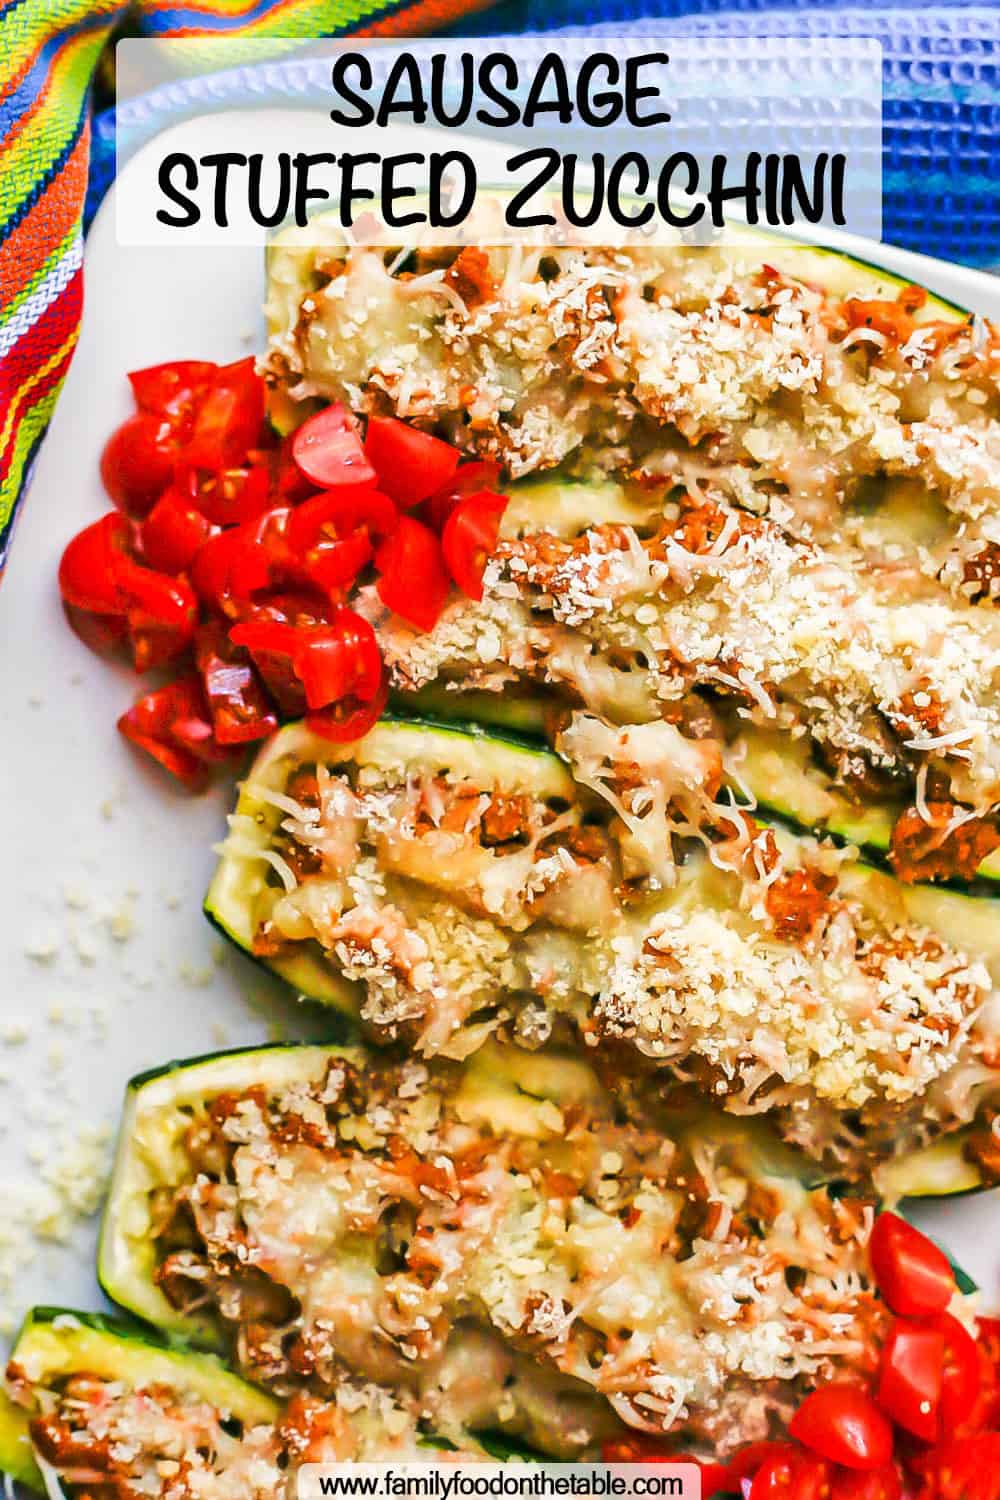 Baked stuffed zucchini served on a white plate with chopped fresh tomatoes on top and a text overlay on the photo